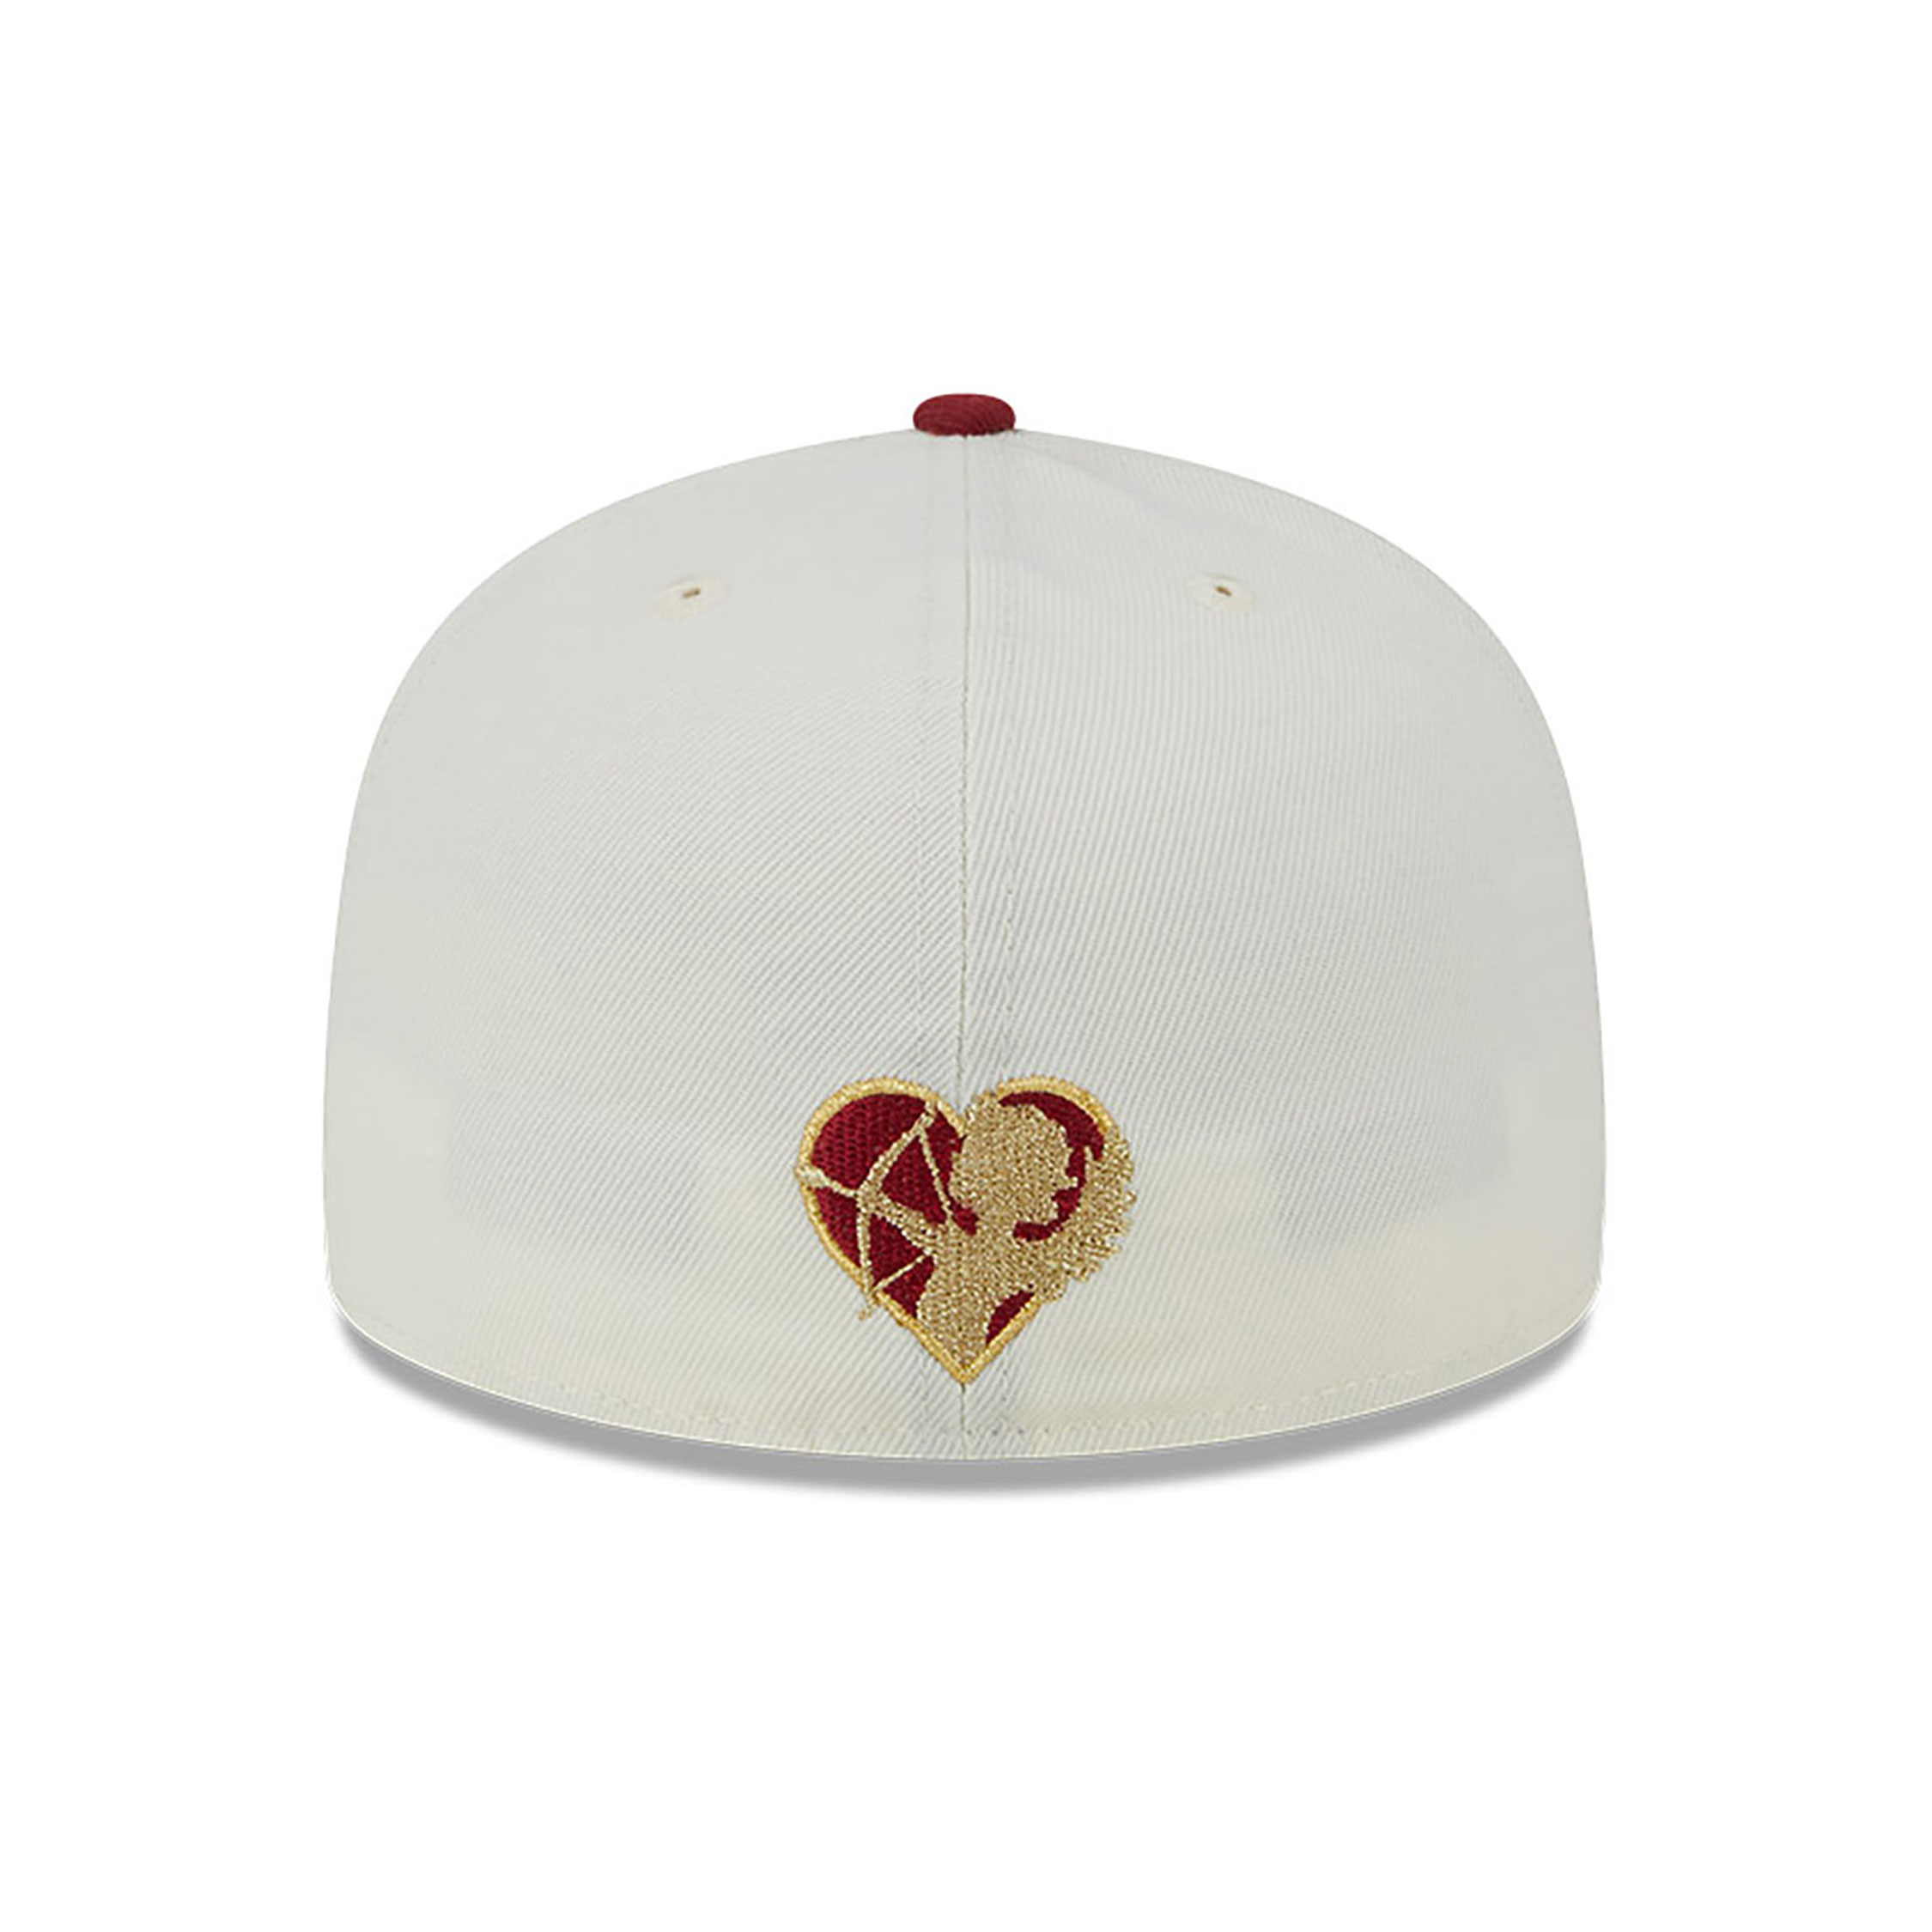 Detroit Tigers Be Mine White 59FIFTY Fitted Cap